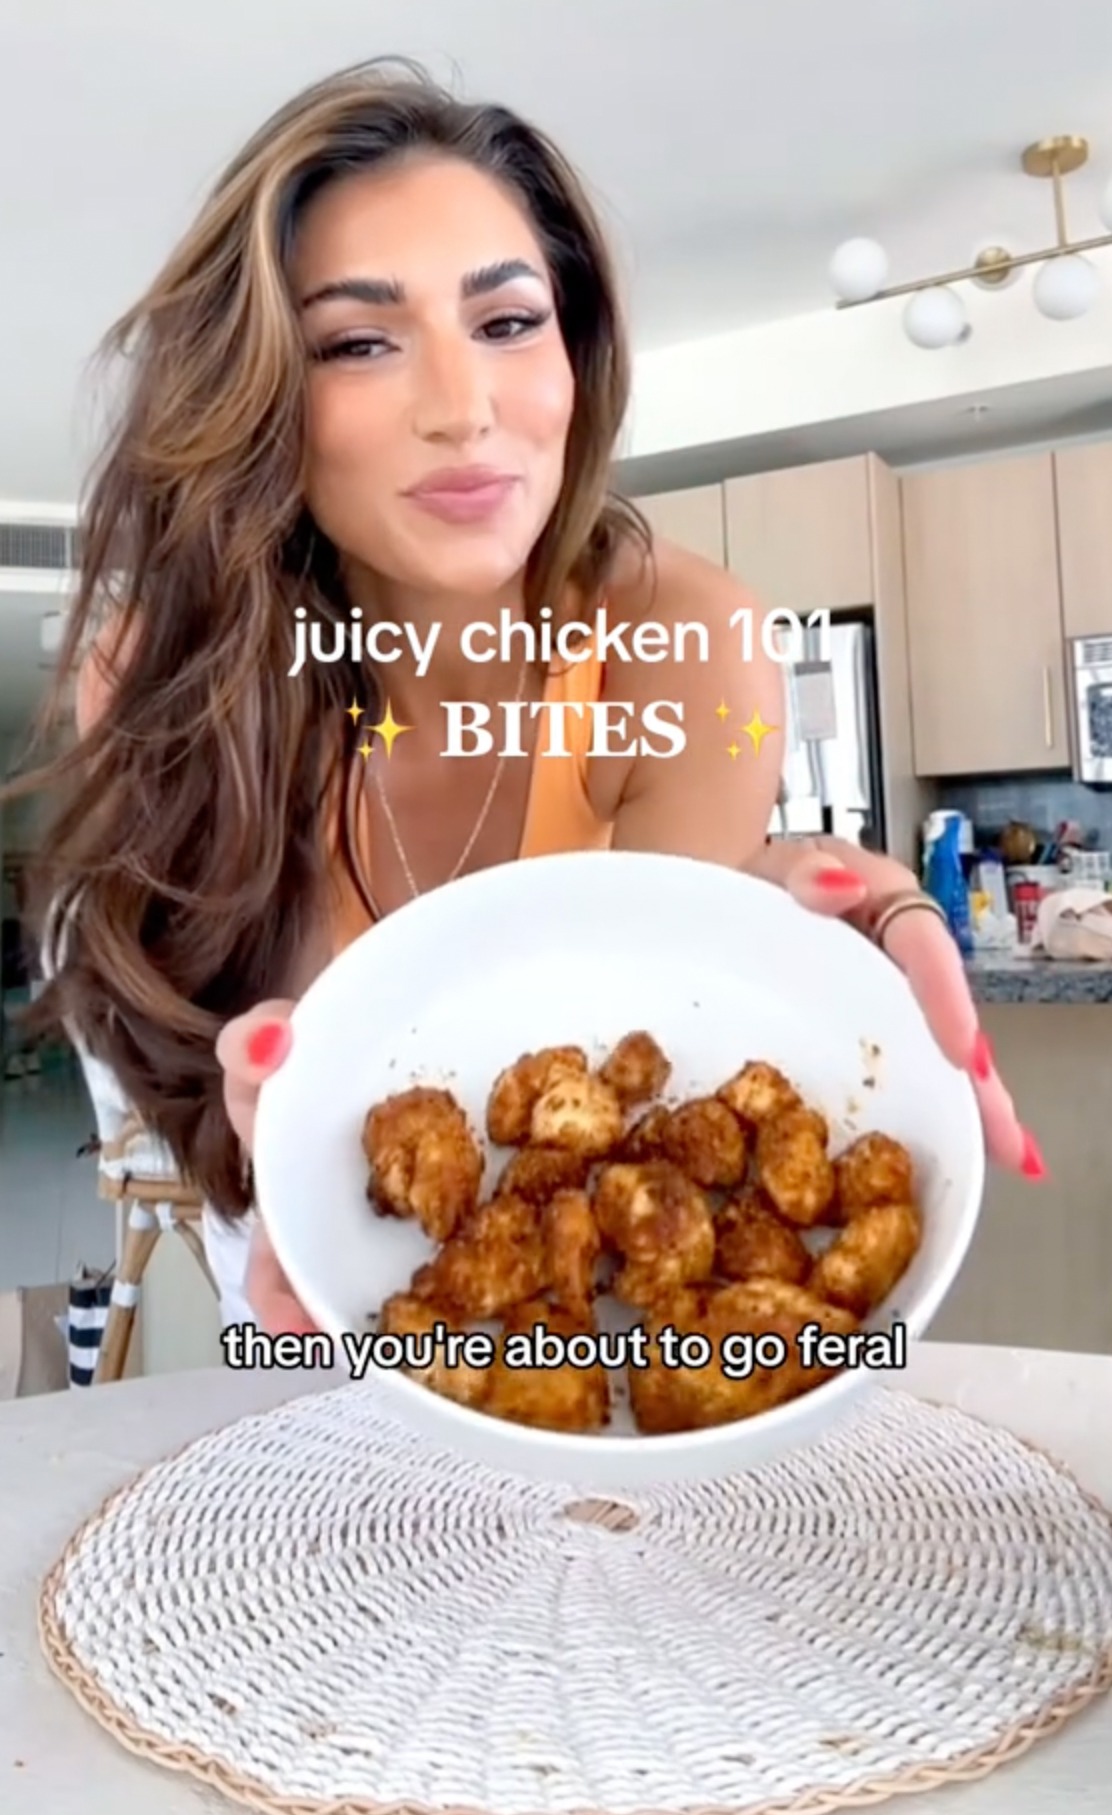 My healthy juicy chicken bites make people go feral – the recipe requires 7 ingredients, it’s the easiest thing ever